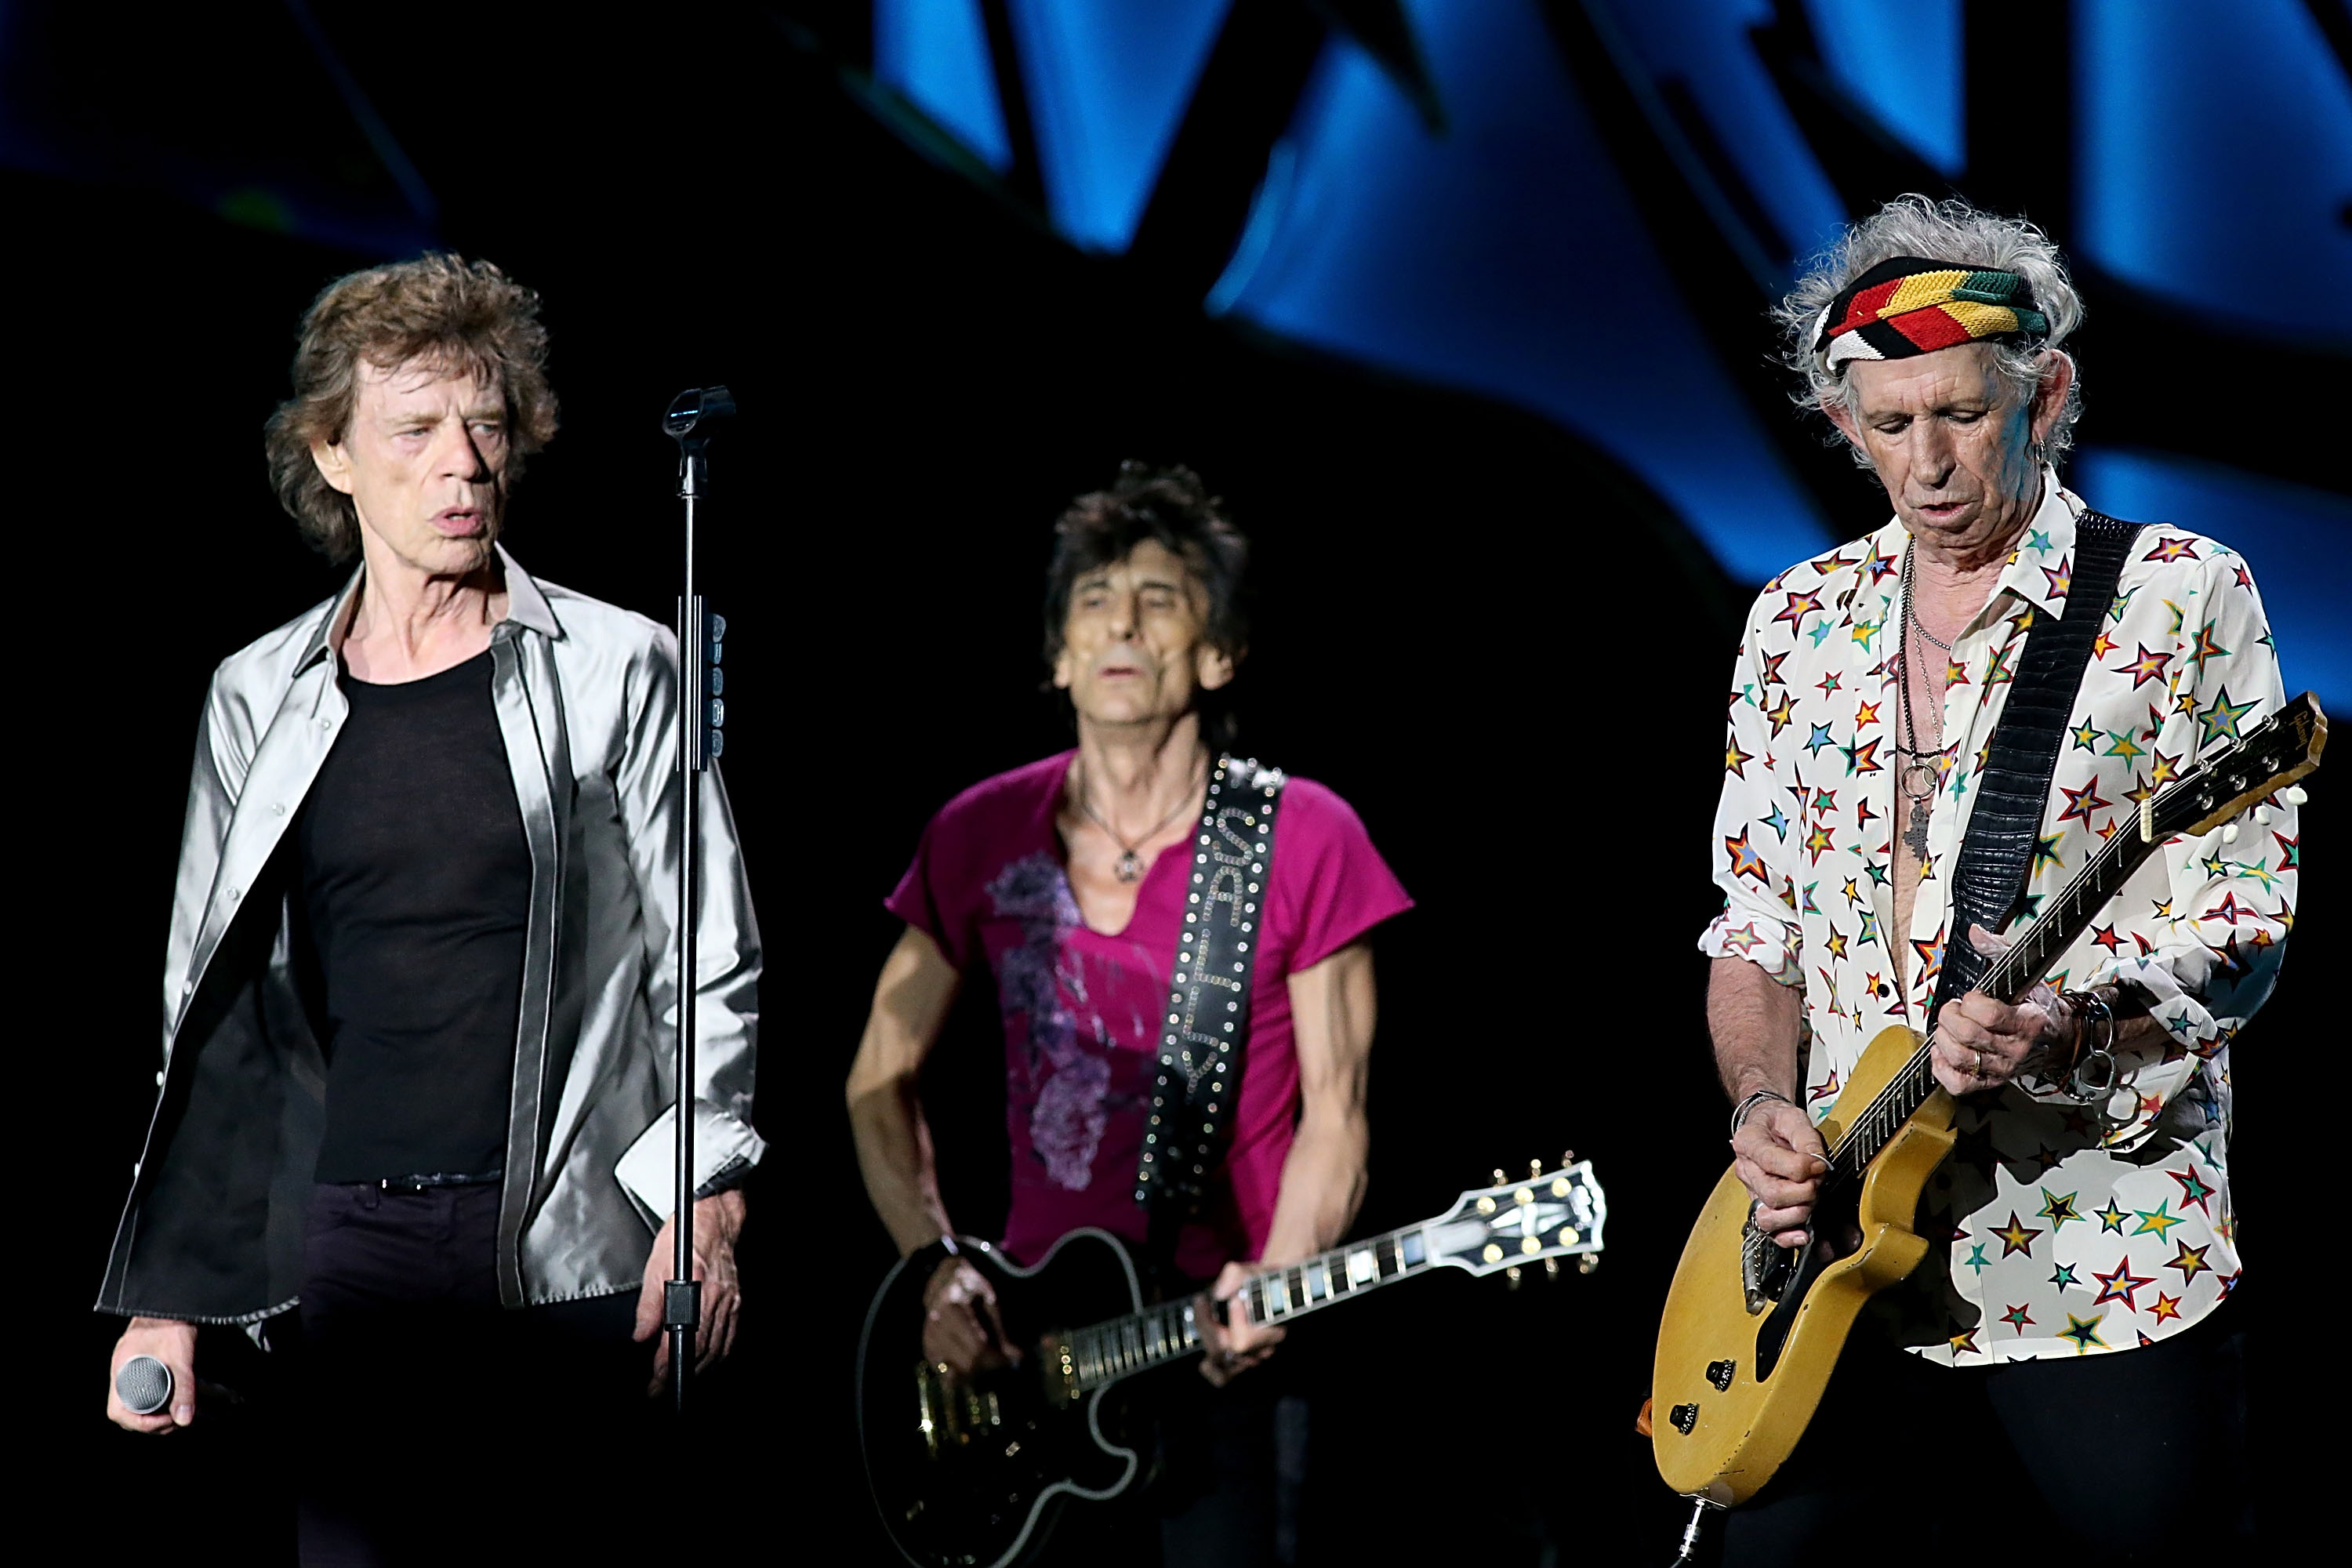 (L - R) Mick Jagger, Ron Wood and Keith Richards perform with the Rolling Stones at Ciudad Deportiva on March 25, 2016 in Havana, Cuba (Gary Miller—FilmMagic/Getty Images)